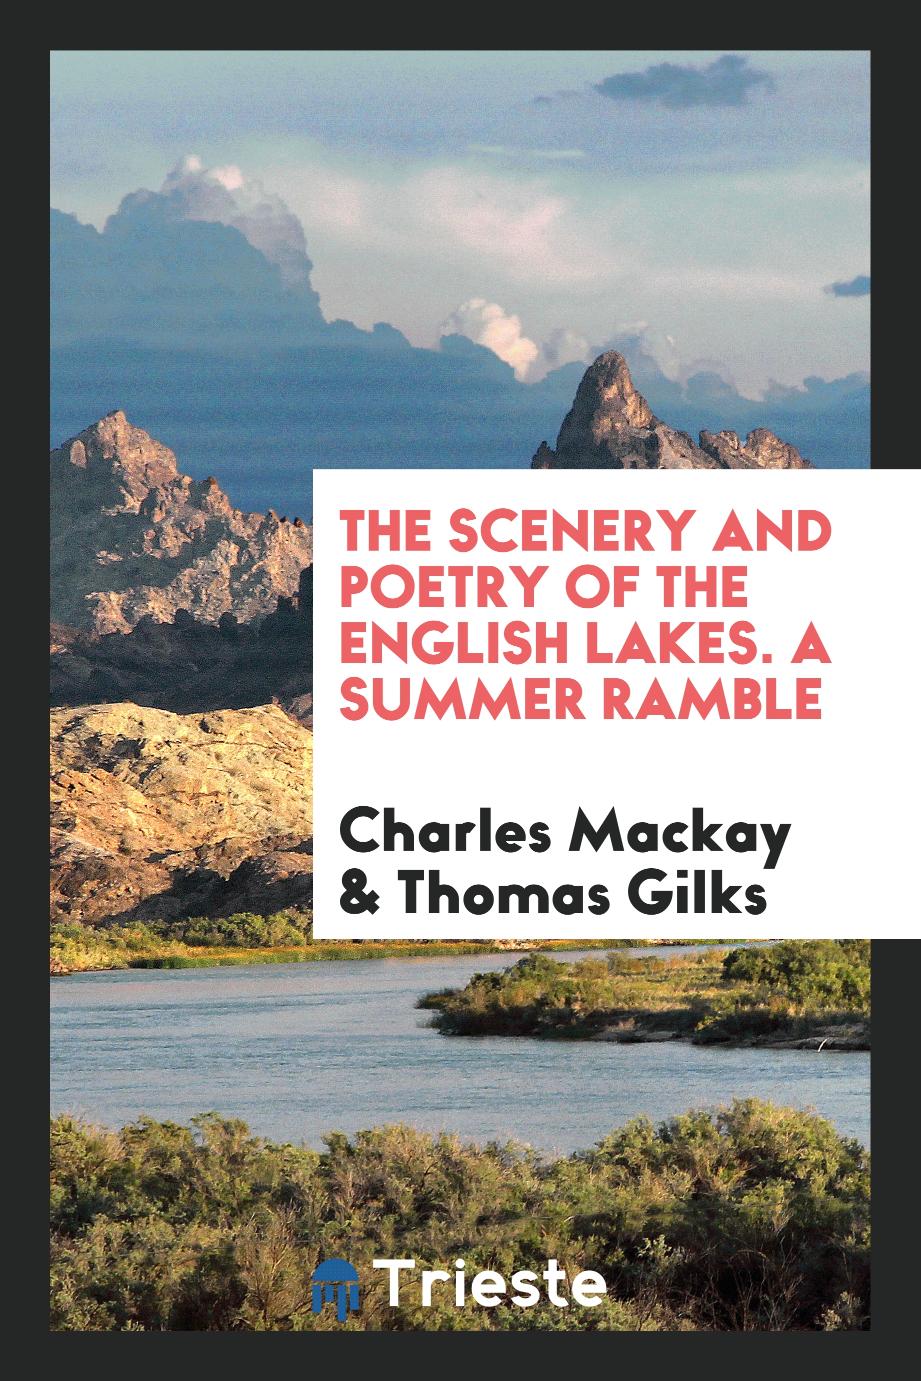 The Scenery and Poetry of the English Lakes. A Summer Ramble